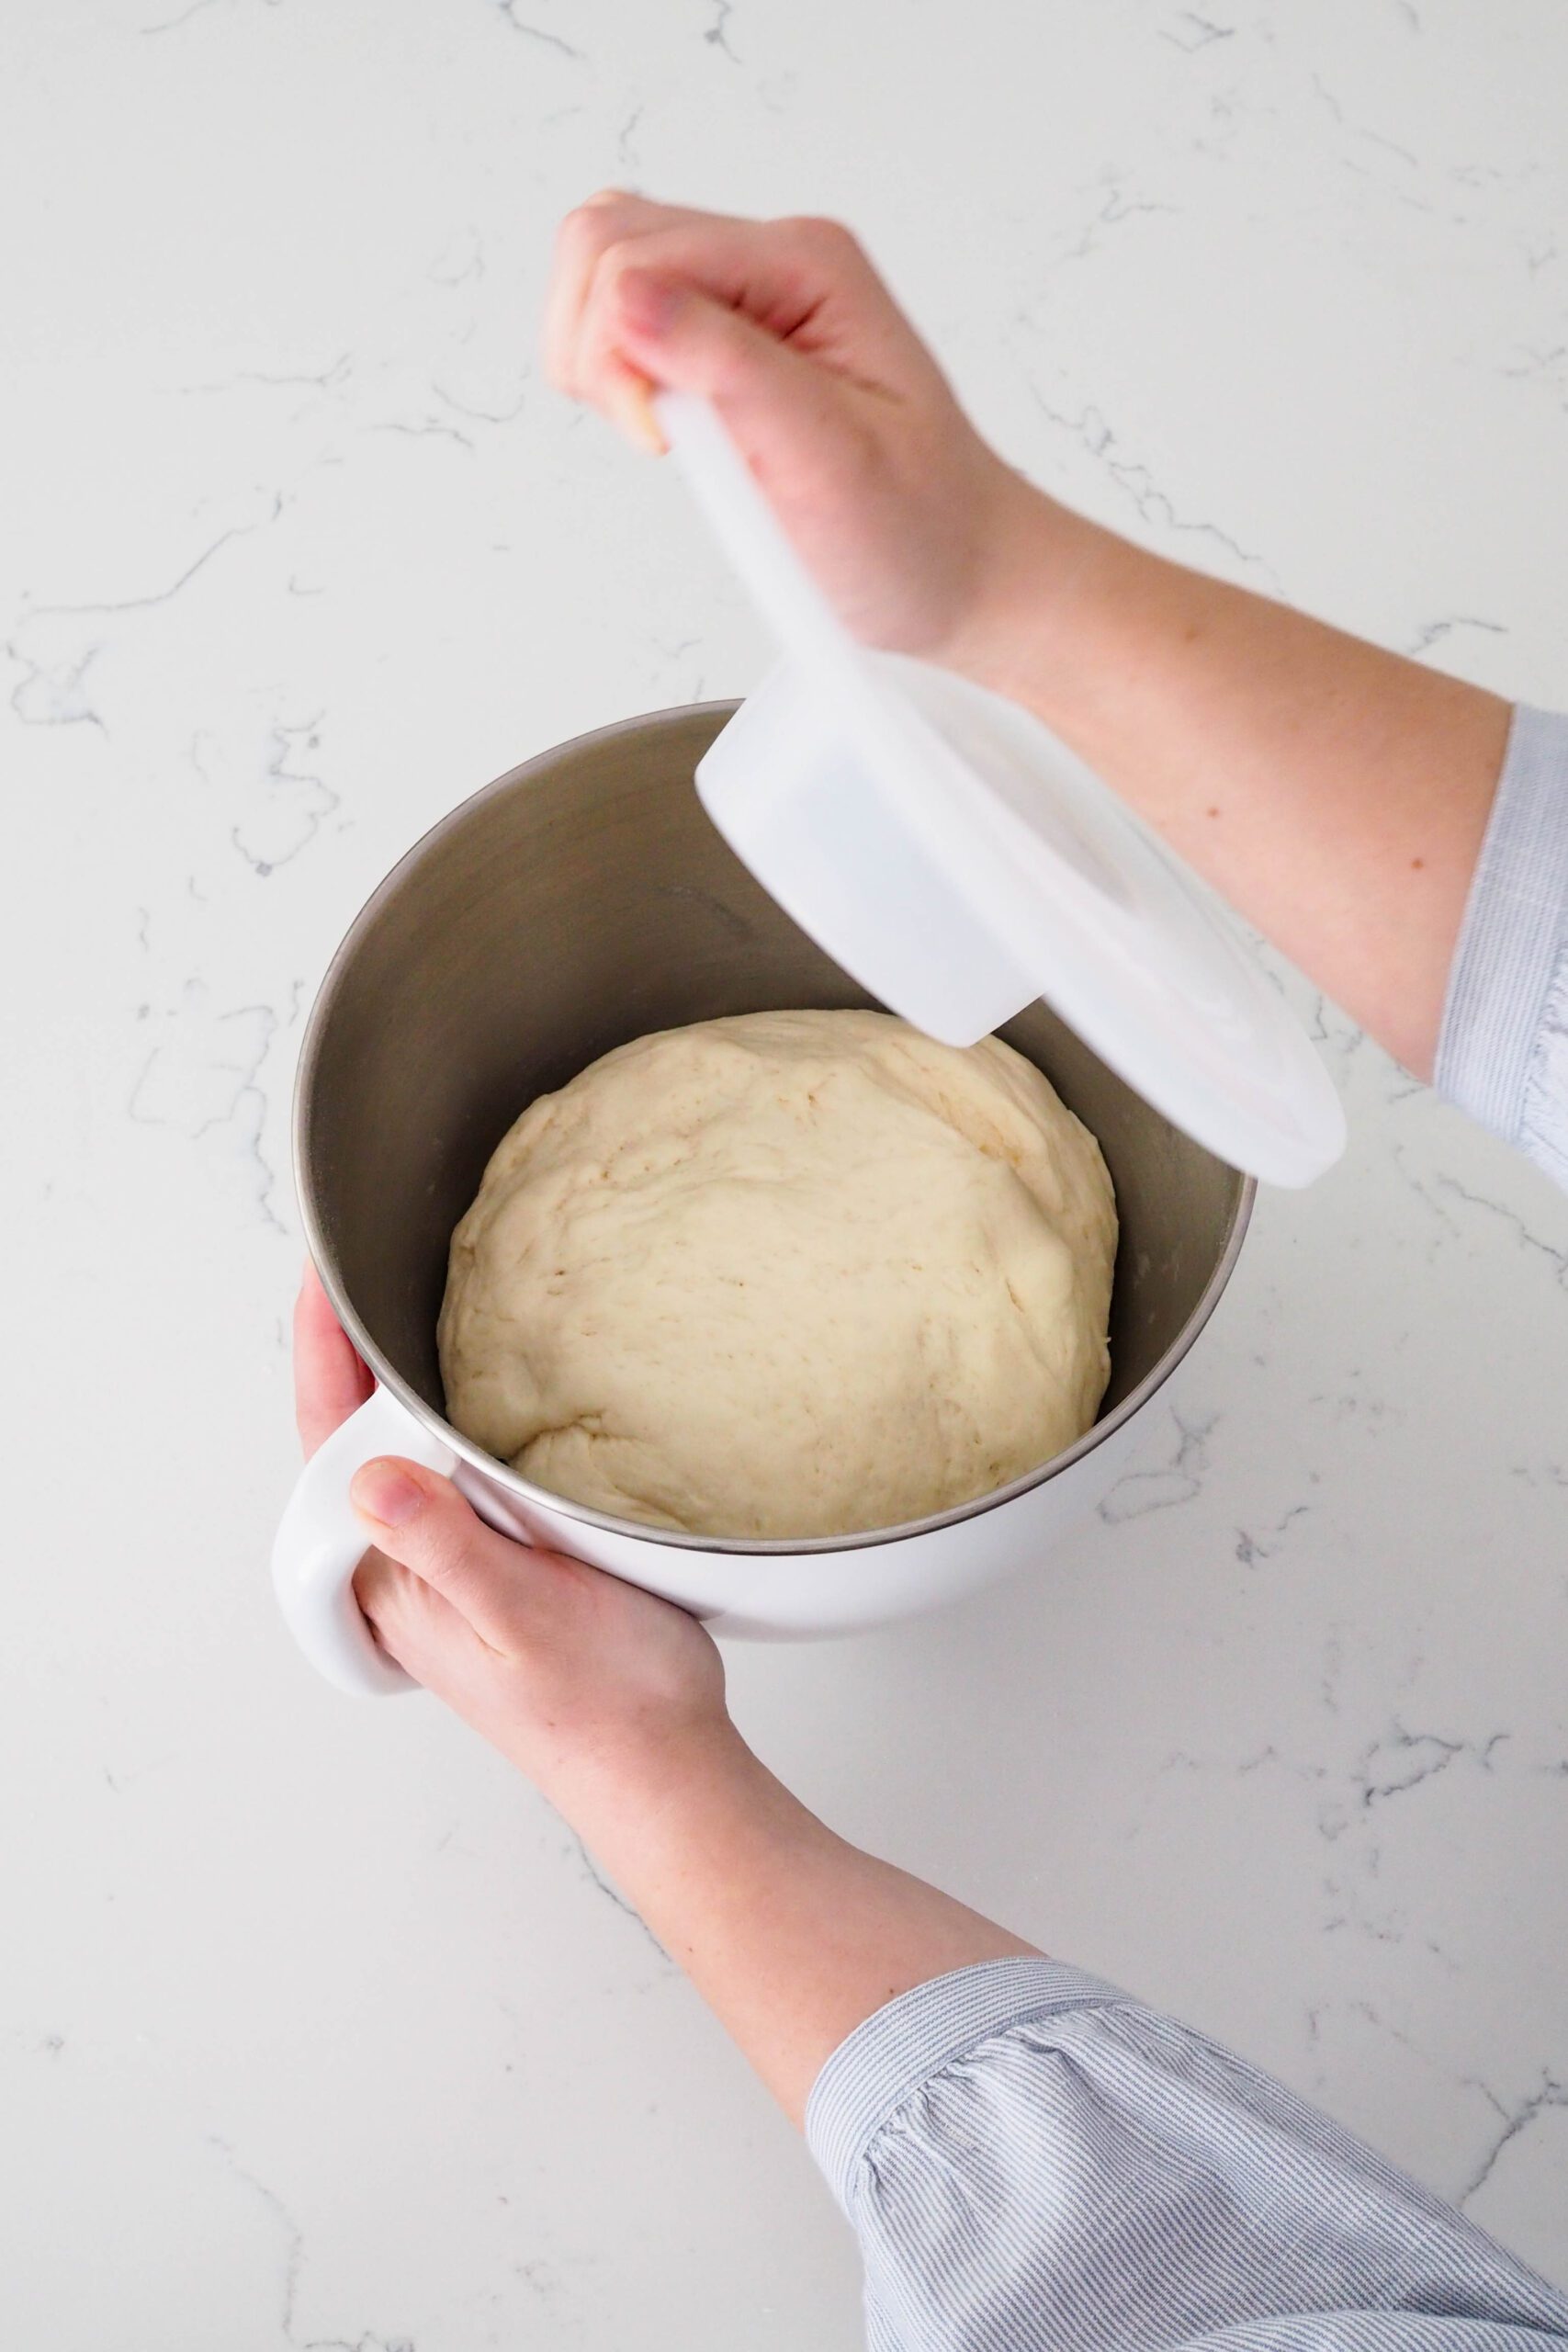 A hand removes the lid off of a mixer bowl with enriched dough that has doubled in size.